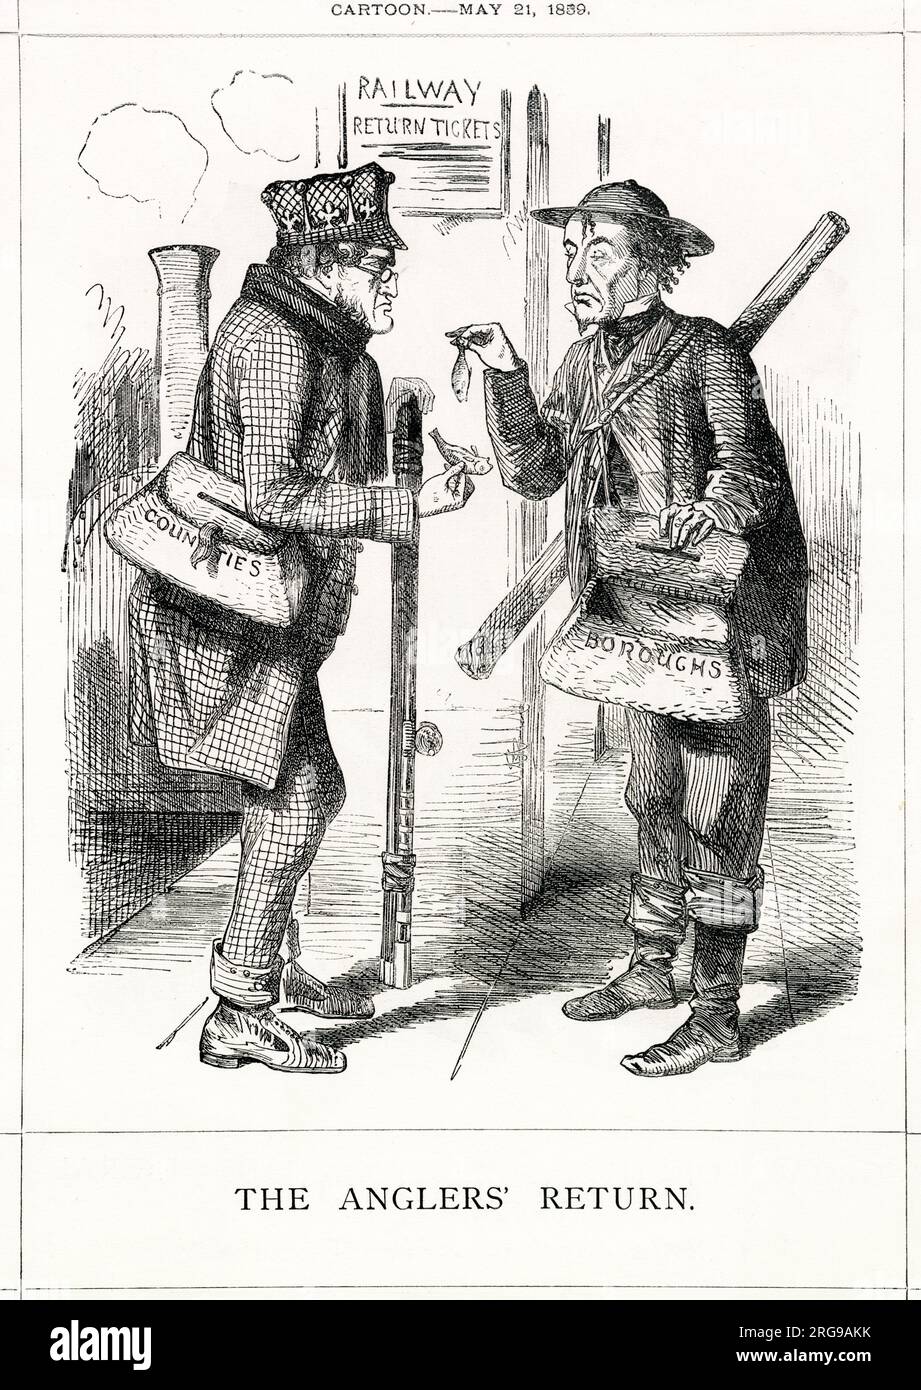 Cartoon, The Anglers' Return -- Lord Derby and Benjamin Disraeli portrayed as fishermen, examining the Conservative party's poor 'returns' from the recent General Election -- the Liberal party under Lord Palmerston had won more seats, and held a majority. Stock Photo